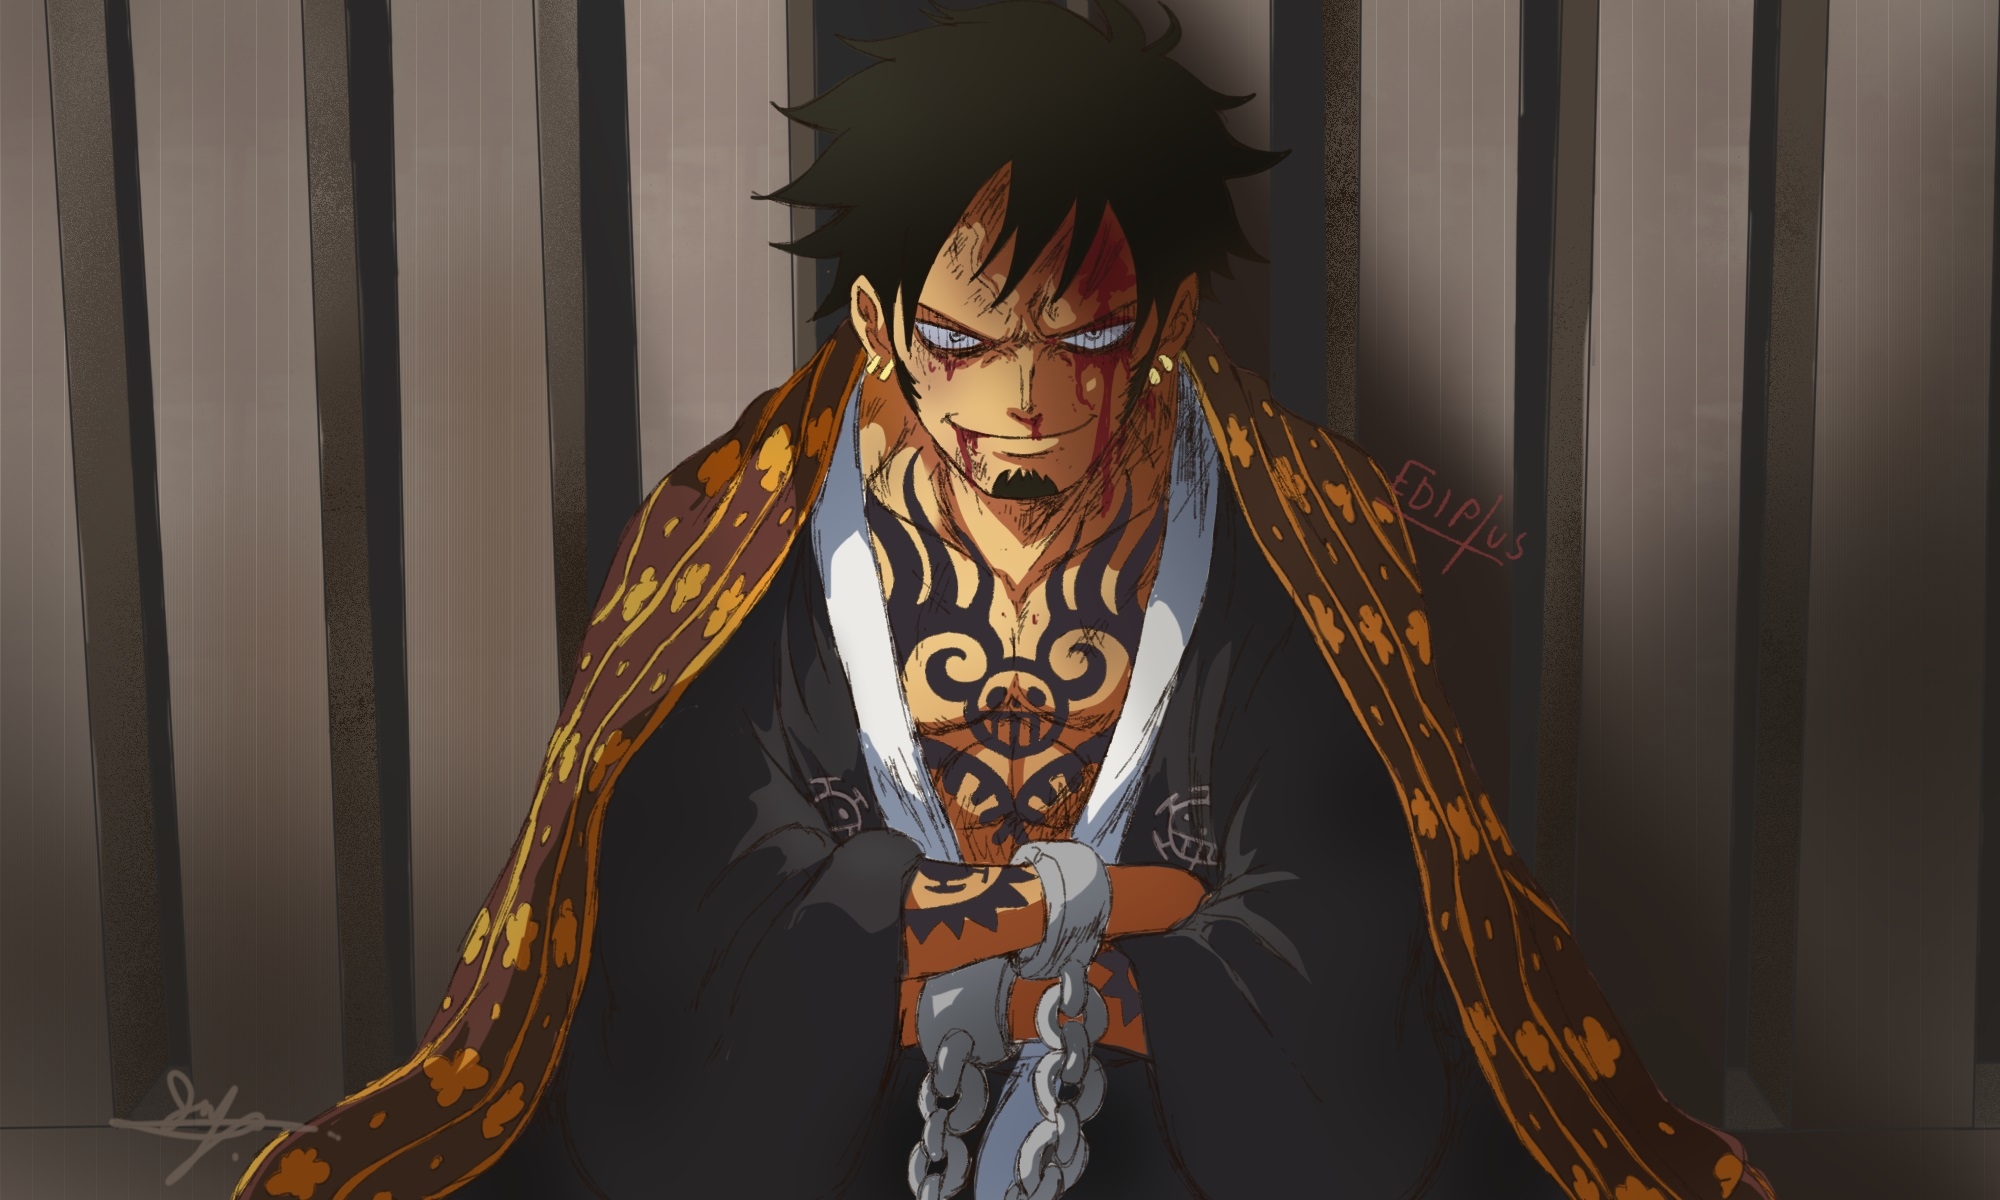 1080x234020 Trafalgar Law In One Piece 1080x234020 Resolution Wallpaper, HD  Anime 4K Wallpapers, Images, Photos and Background - Wallpapers Den